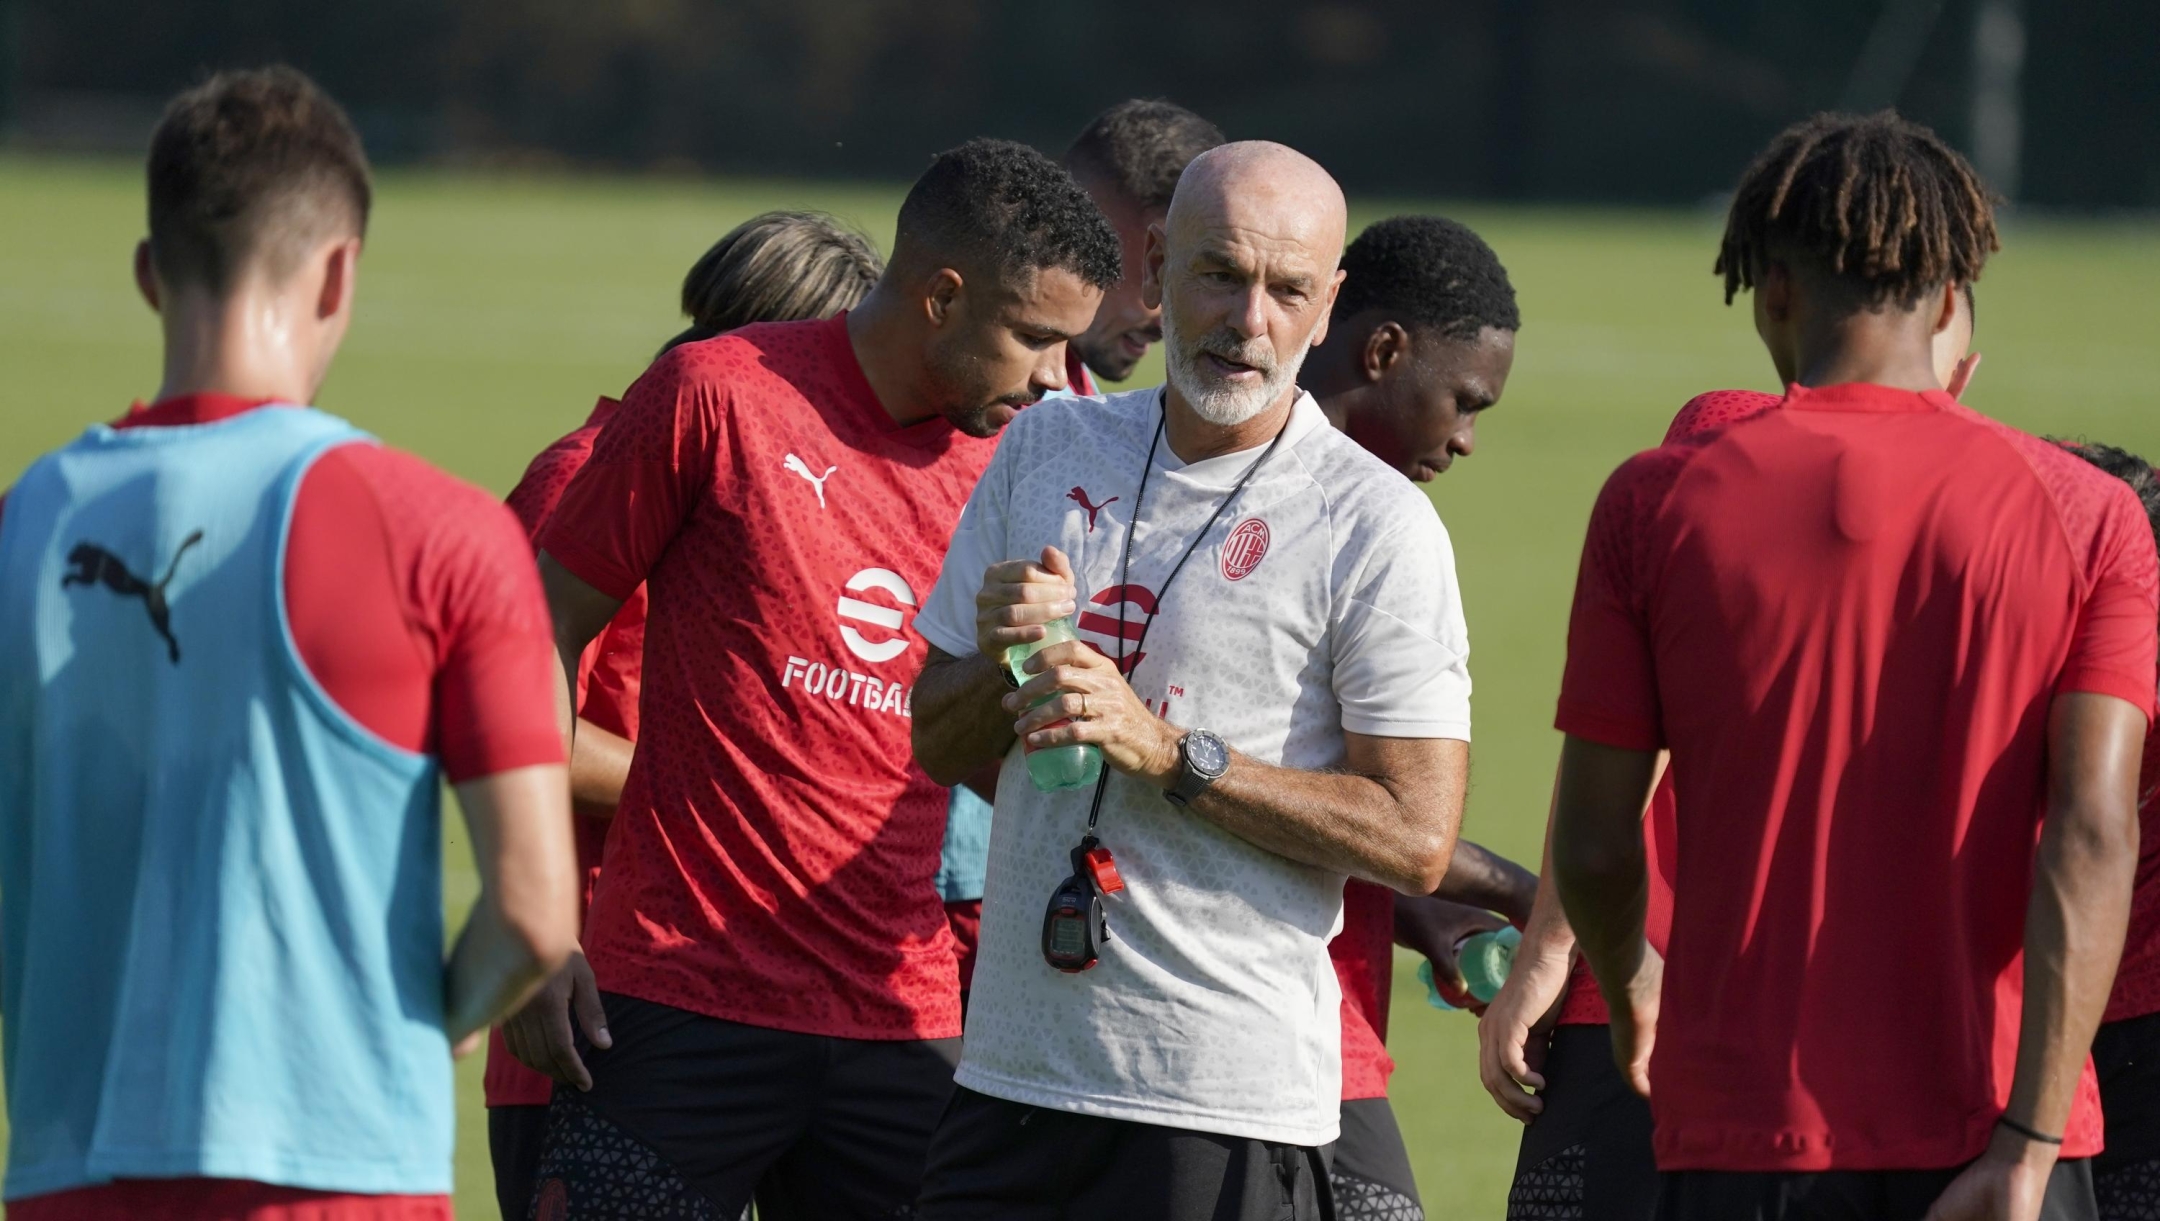 CAIRATE, ITALY - JULY 17: Stefano Pioli head coach of AC Milan looks on during an AC Milan training session at Milanello on July 17, 2023 in Cairate, Italy. (Photo by Pier Marco Tacca/AC Milan via Getty Images)